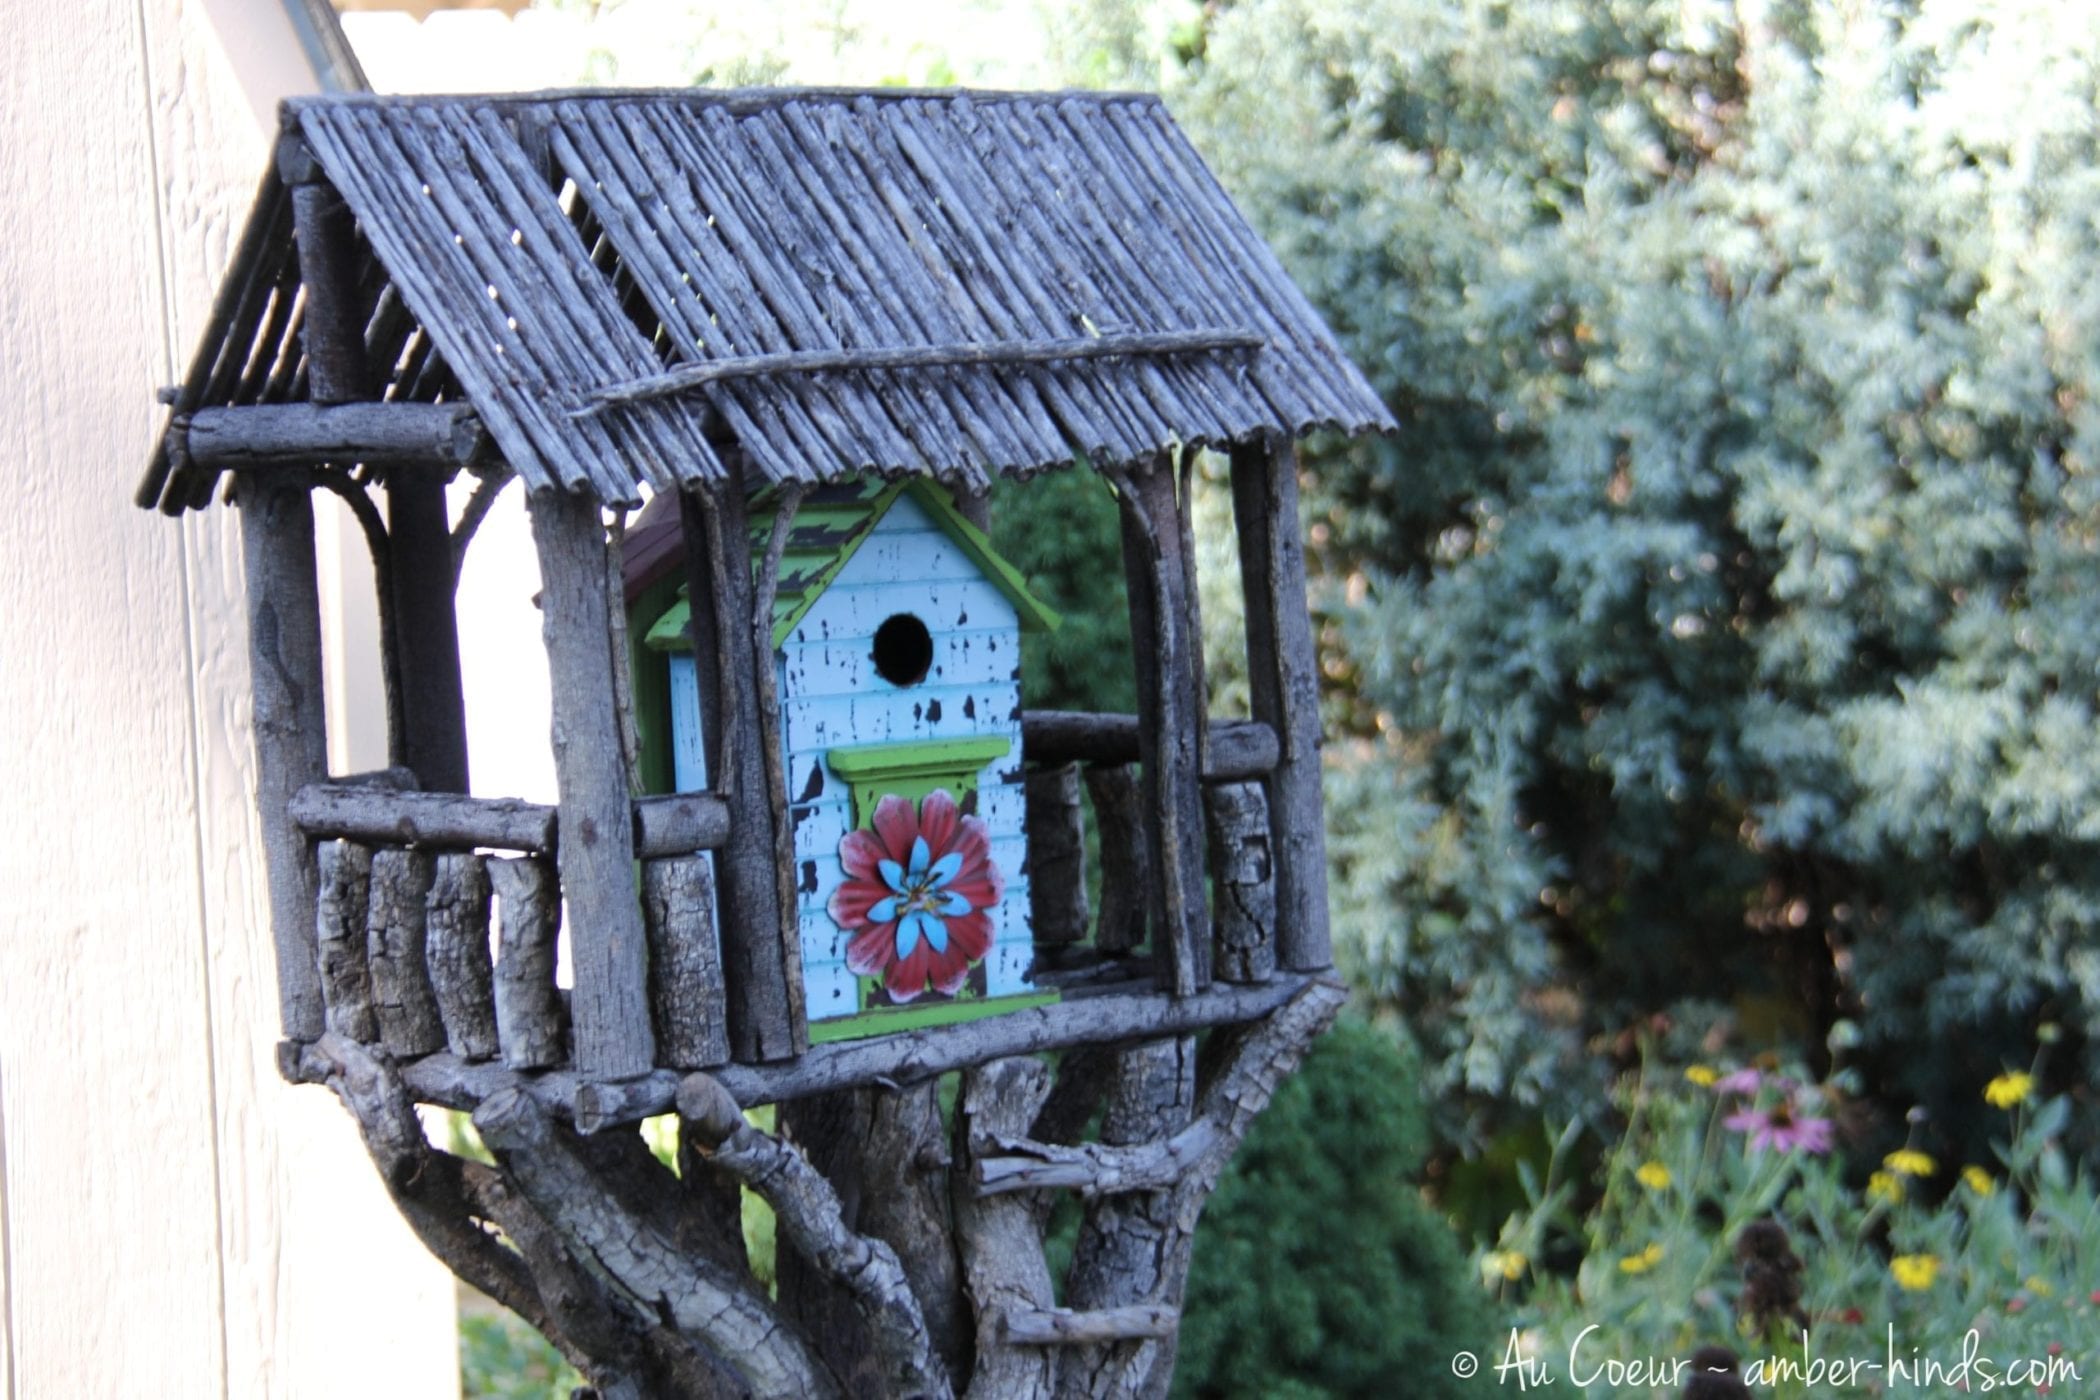 Birdhouse made of sticks and twigs with a tin flower on it.